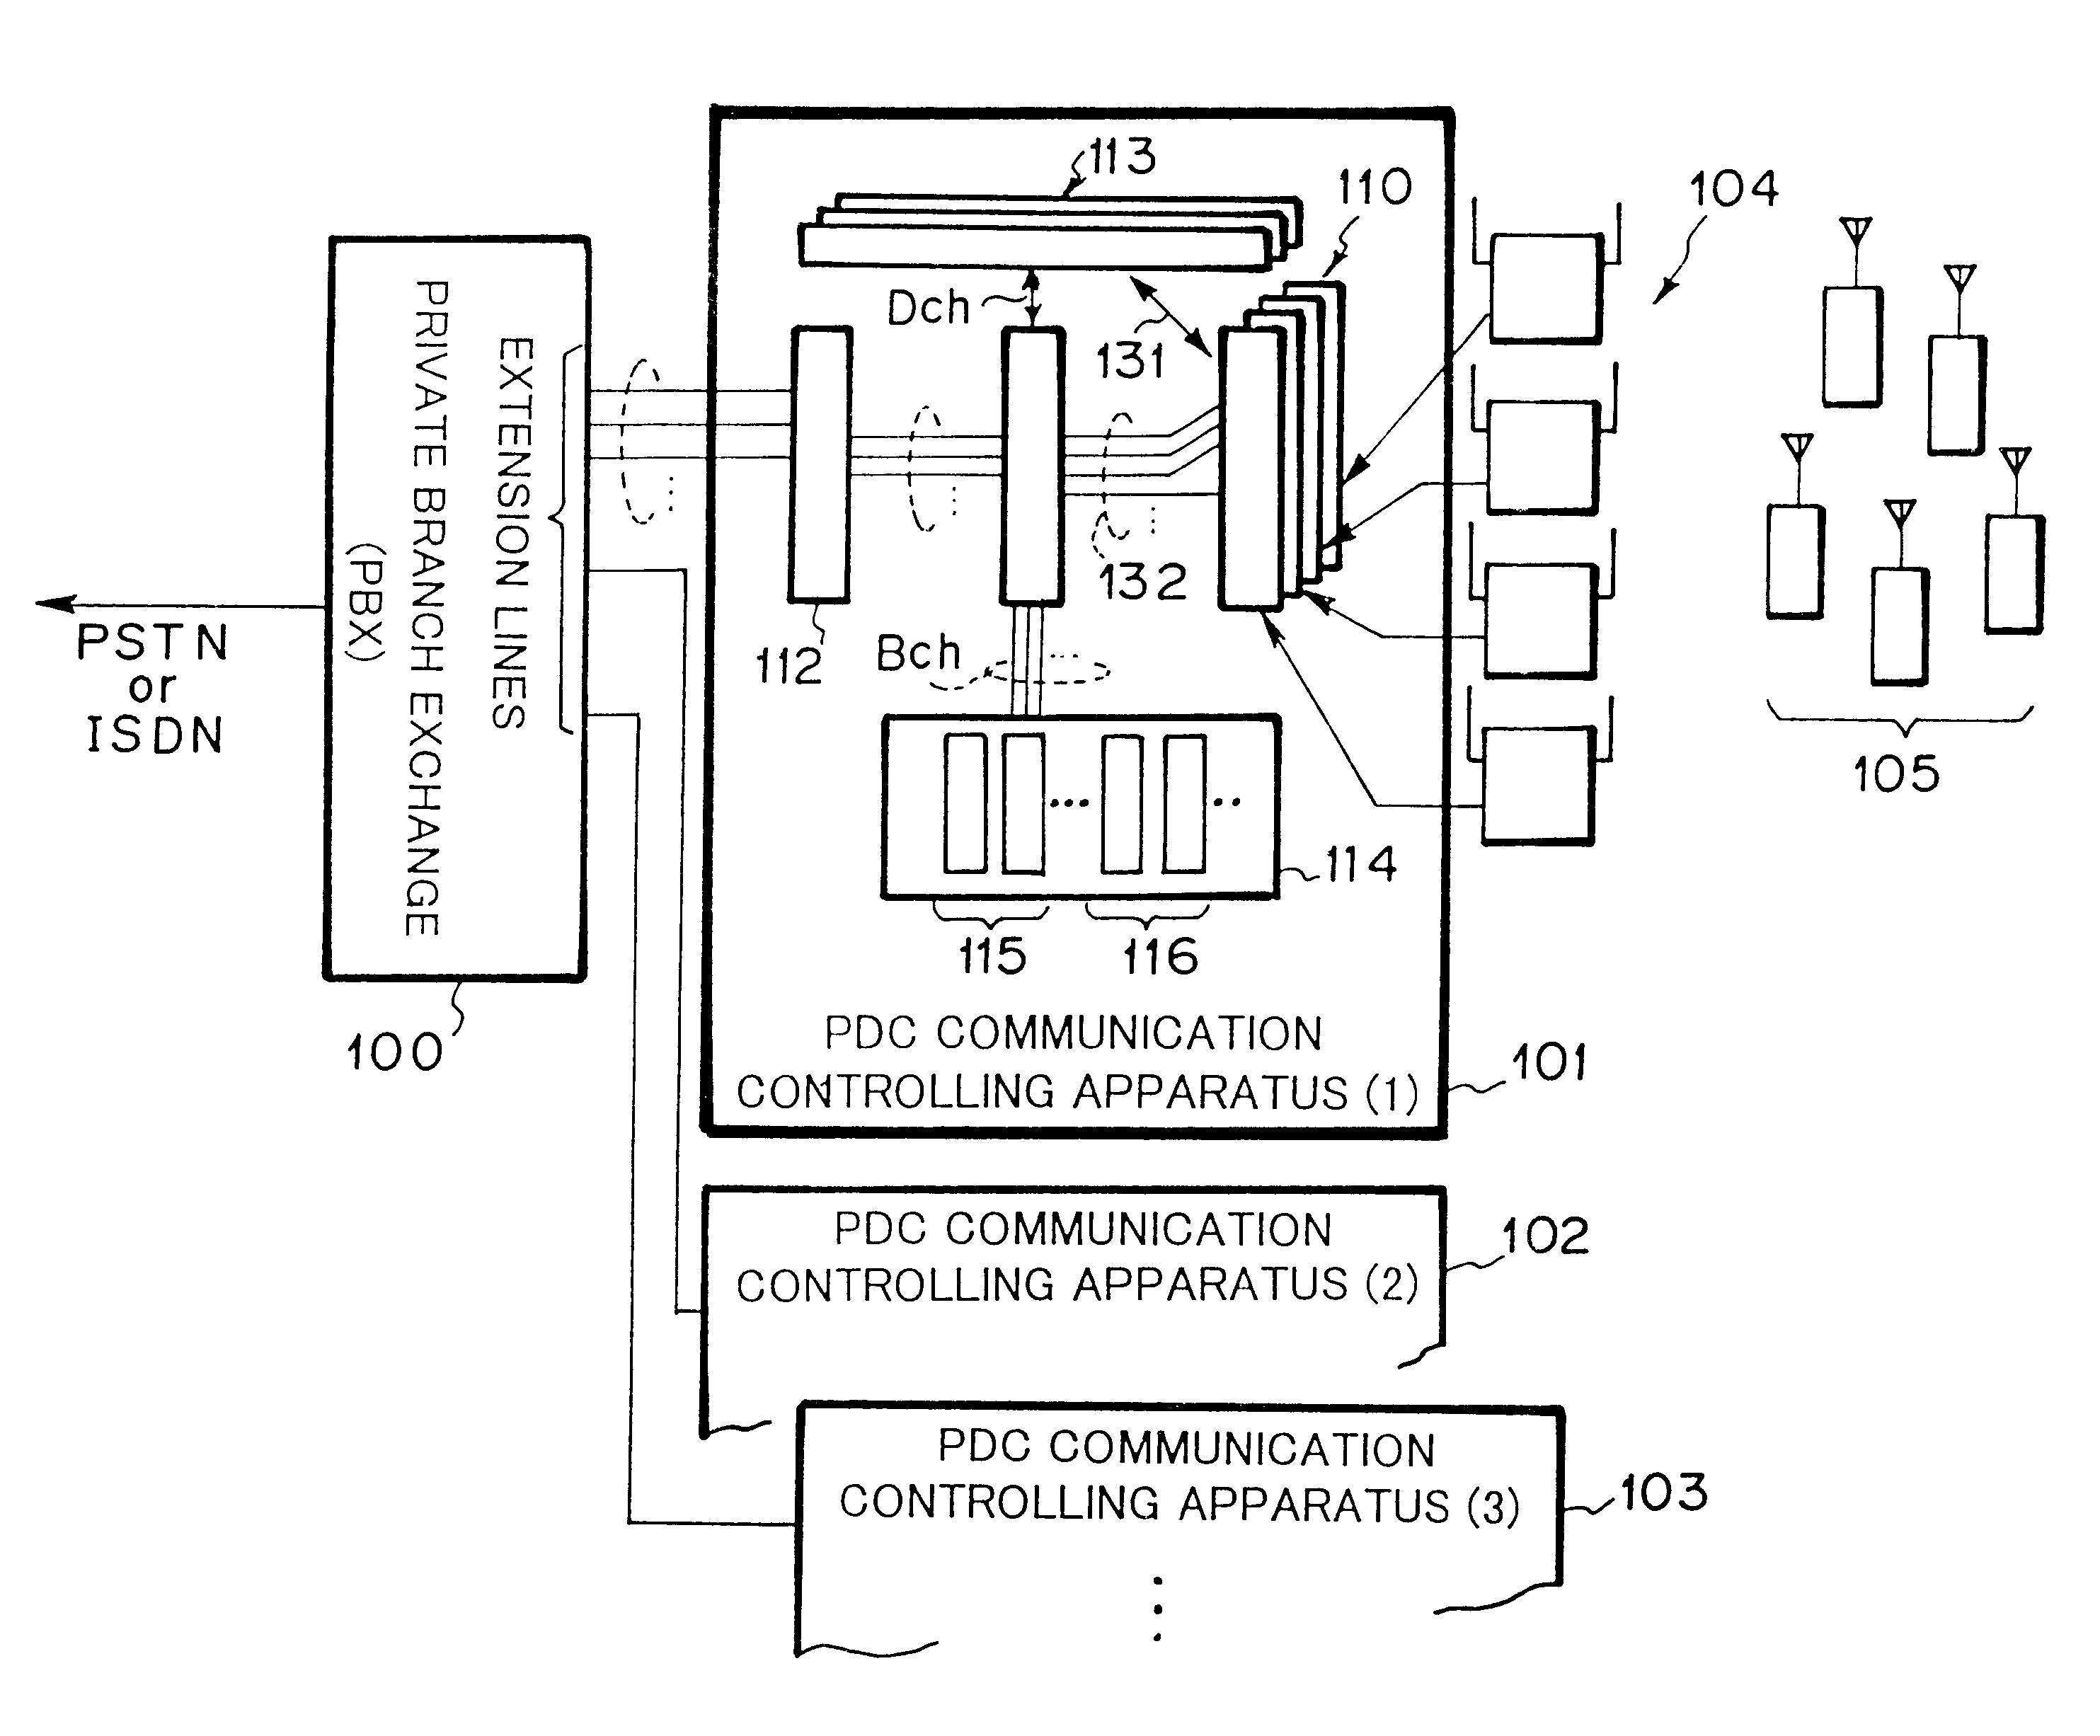 PDC (personal digital cellular) communication controlling apparatus and system thereof